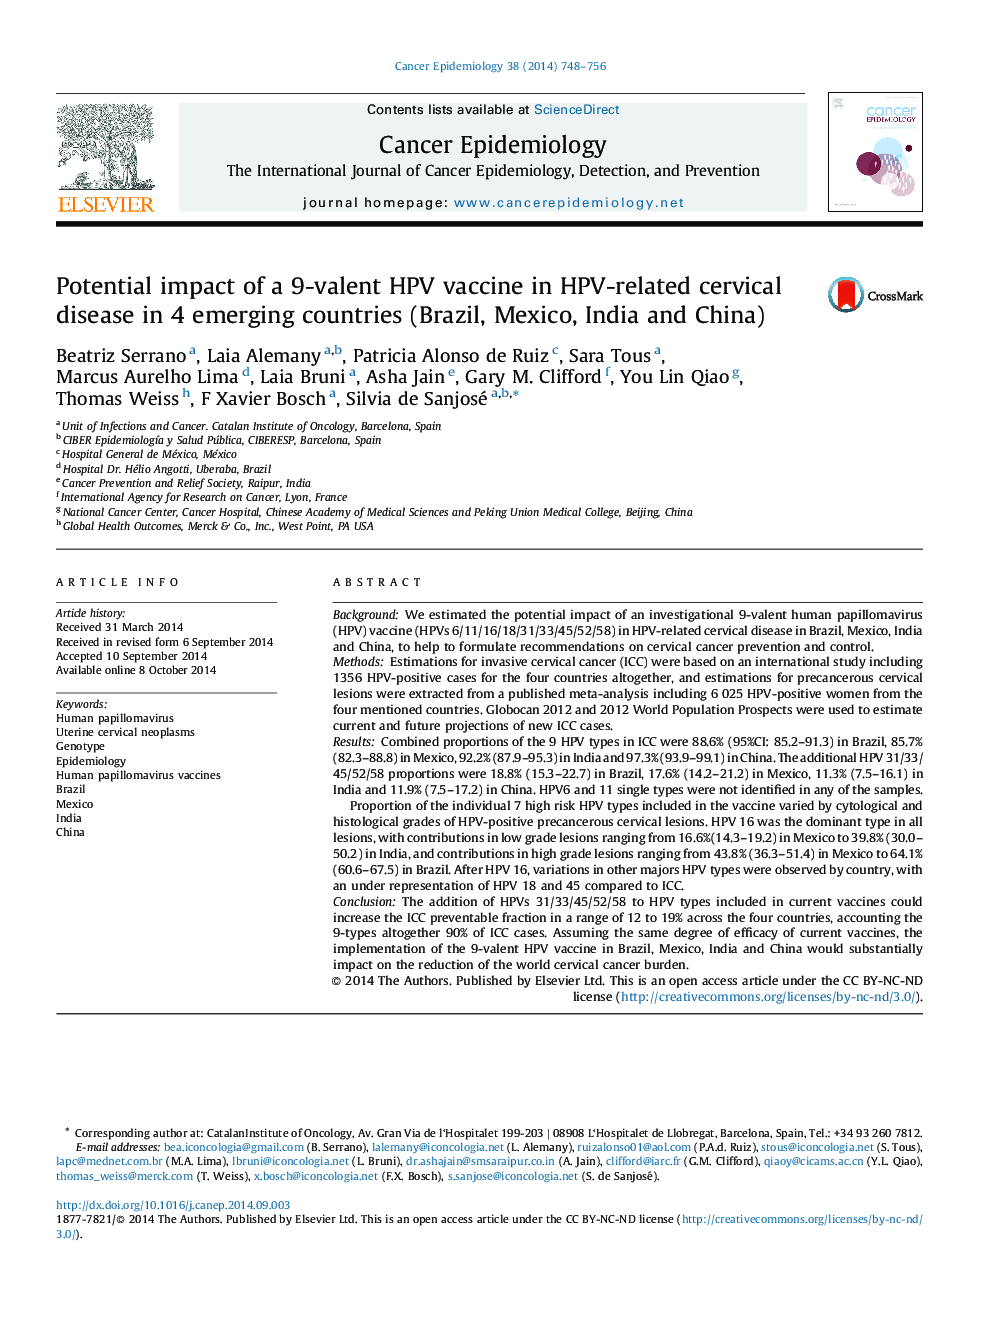 Potential impact of a 9-valent HPV vaccine in HPV-related cervical disease in 4 emerging countries (Brazil, Mexico, India and China)